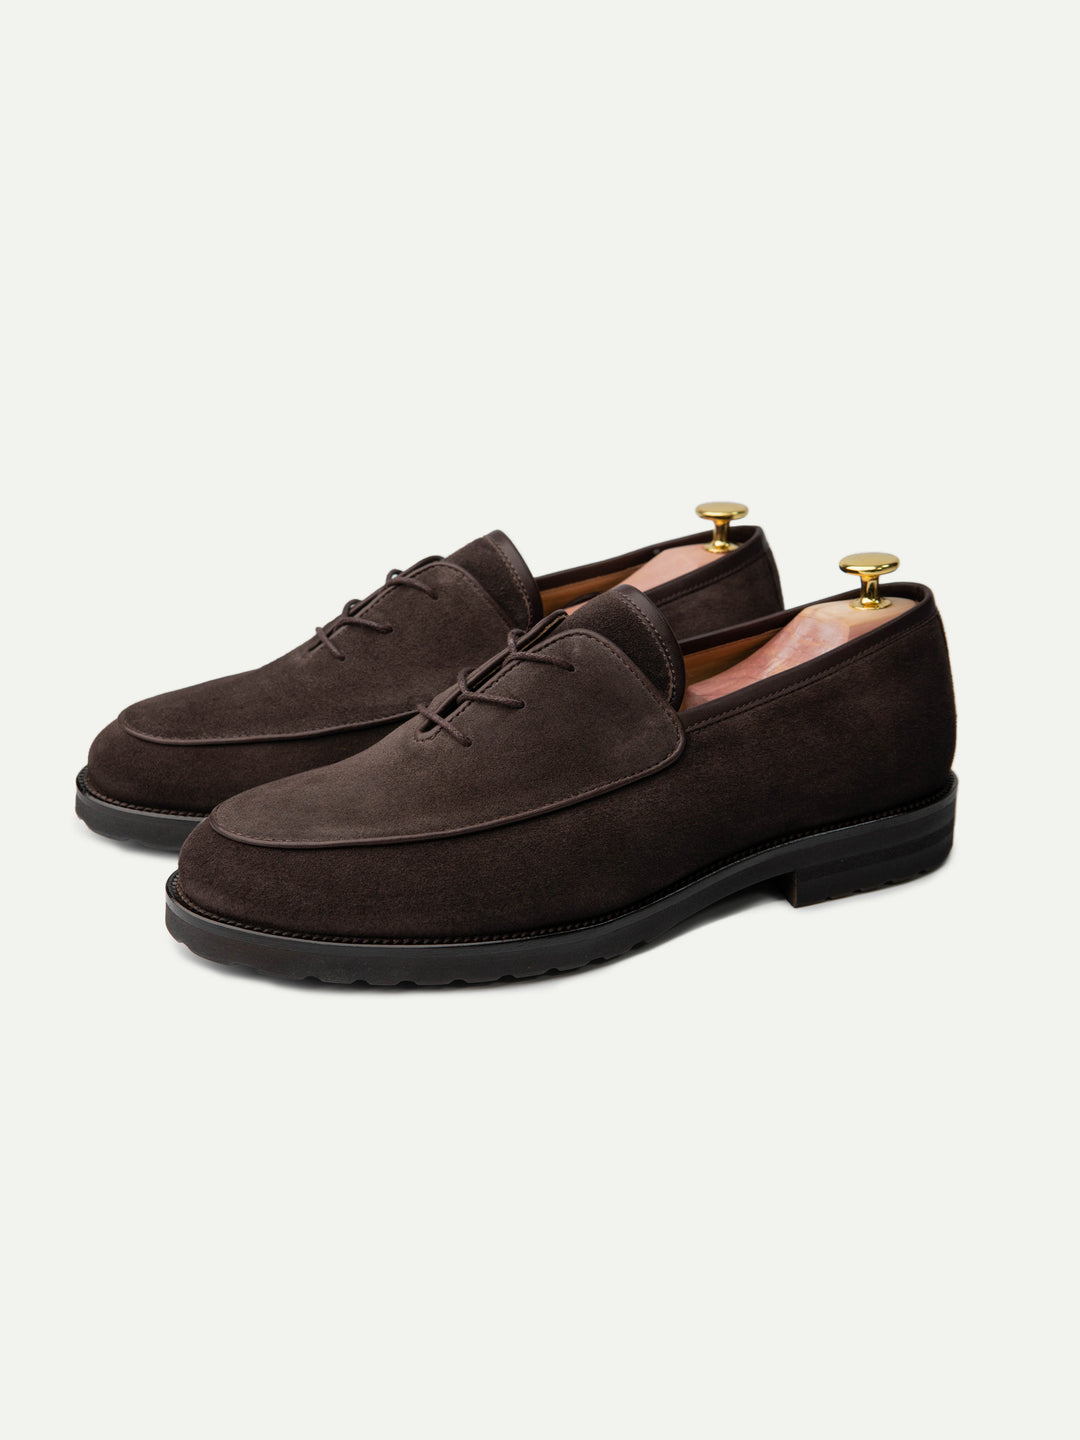 Clarce loafers